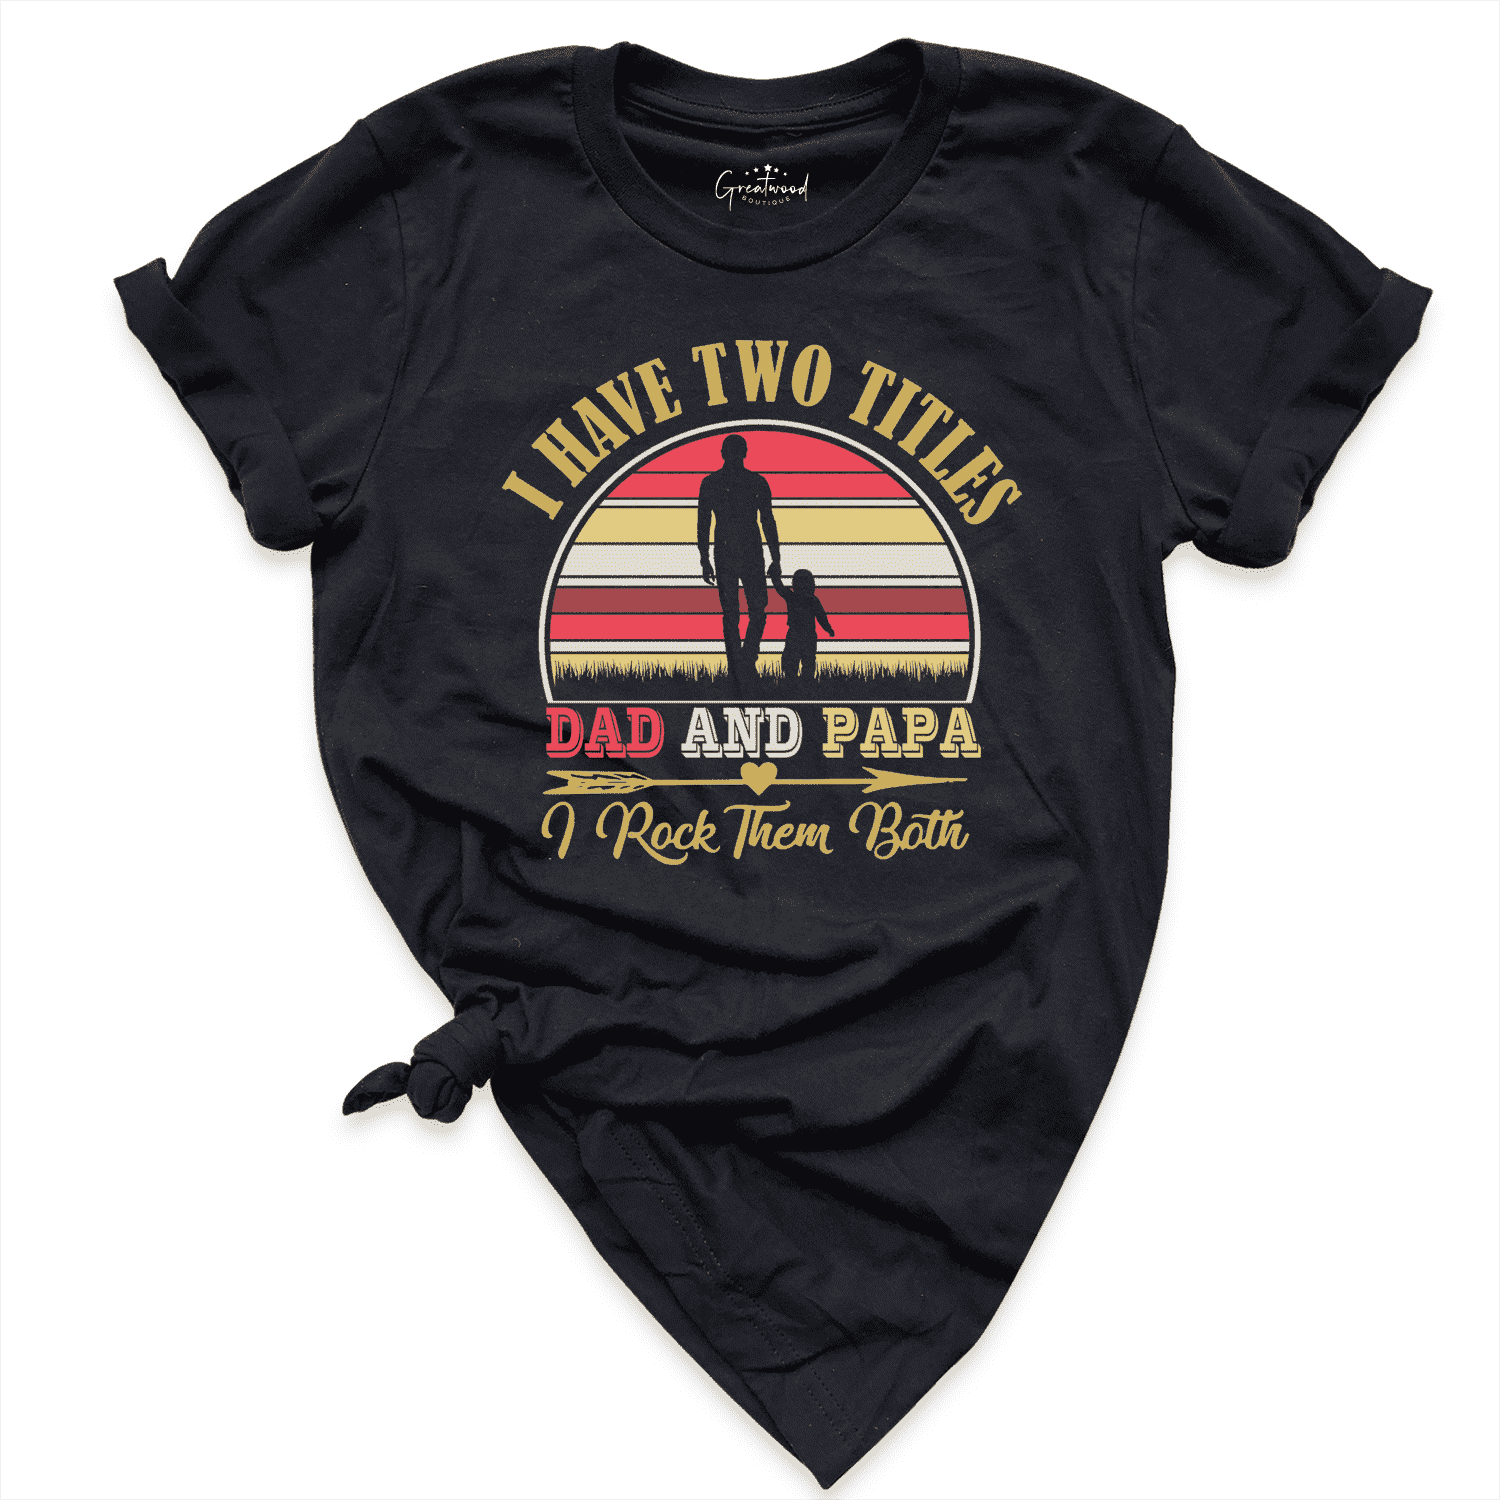 Dad and Papa Shirt Black - Greatwood Boutique